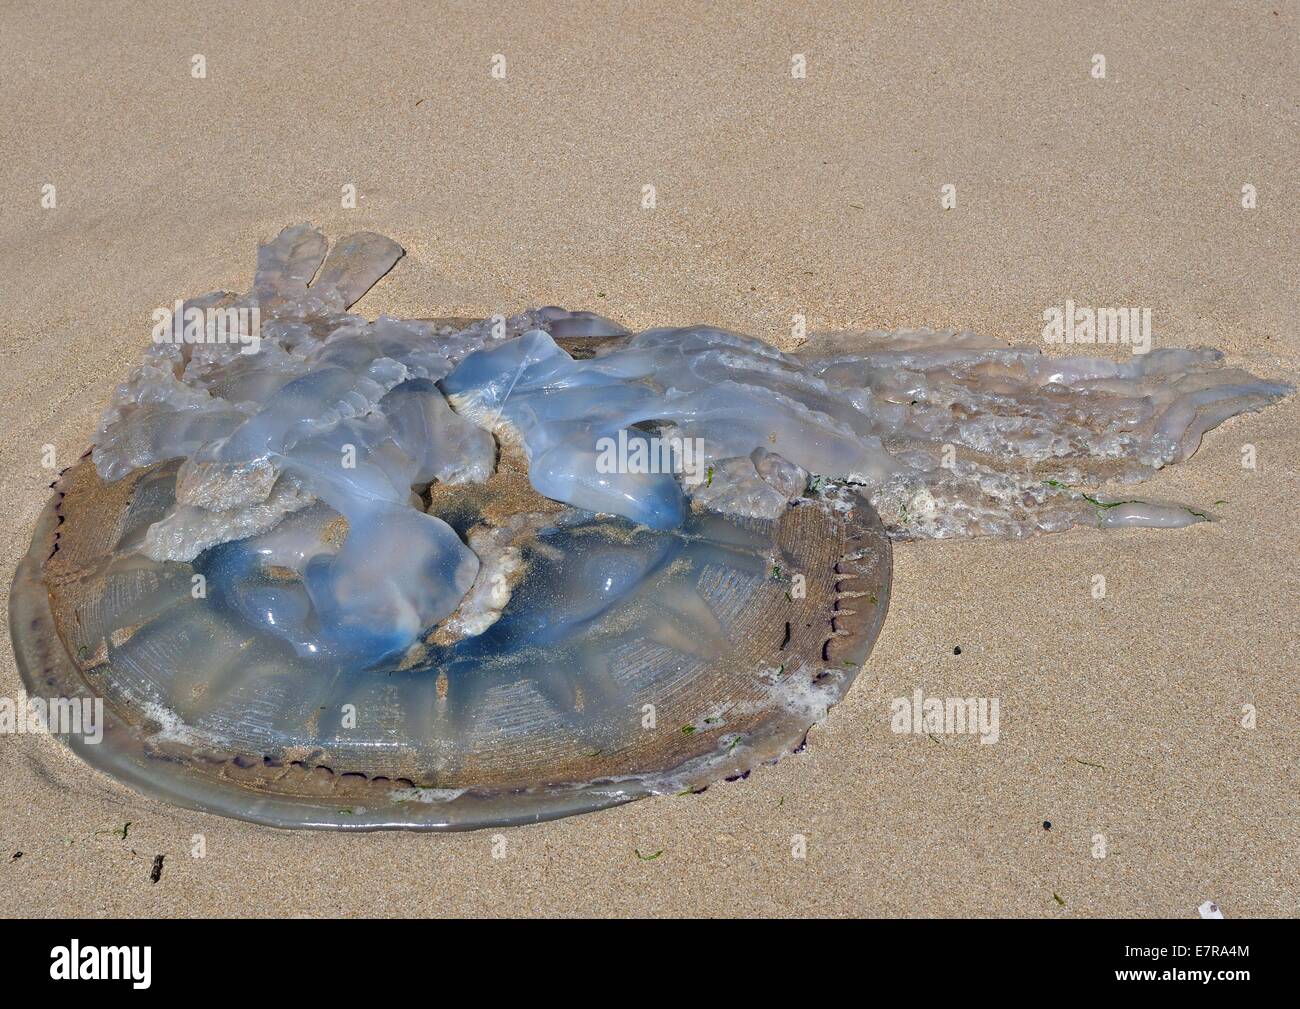 one giant barrel, dustbin-lid, jellyfish (Rhizosstoma octopus), washed up on South Beach, Tenby, Pembrokeshire, Wales, United Kingdom Stock Photo